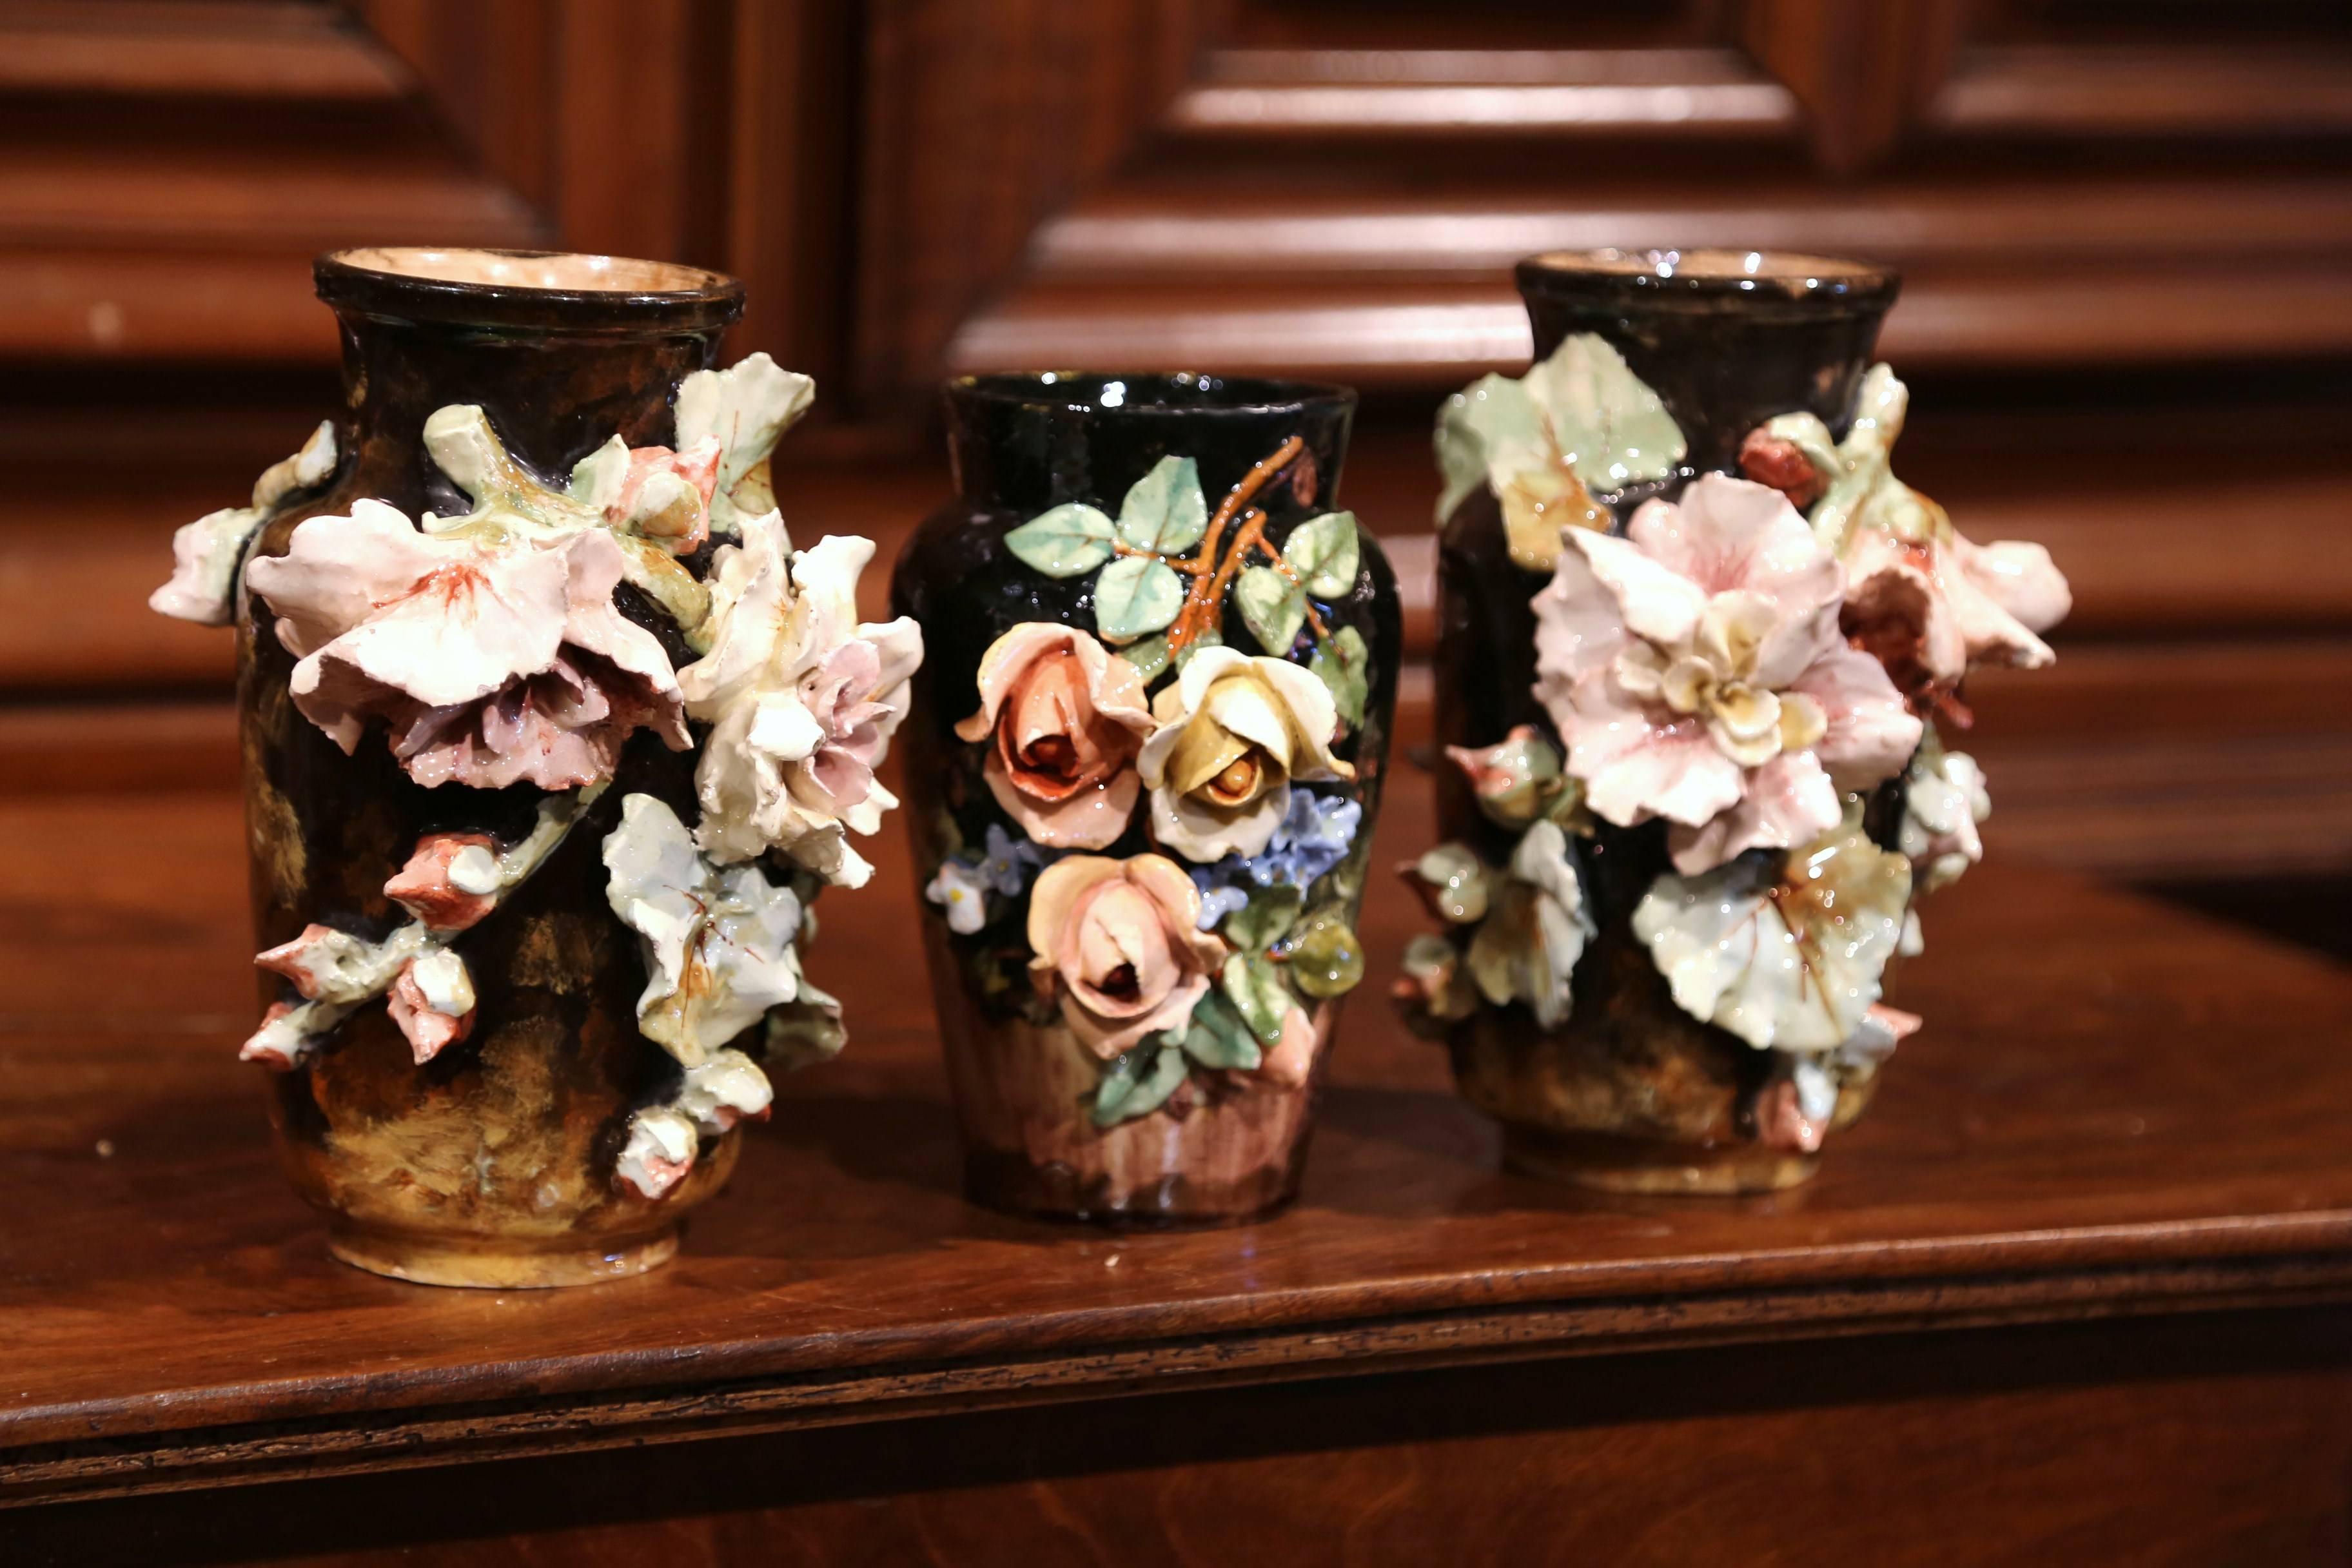 This beautiful, colorful set of three hand-painted Majolica vases were sculpted in Montigny sur Loing, France, circa 1860. Each ceramic vase features soft pink and beige roses with pale green leaves, all in high relief with brown background. The